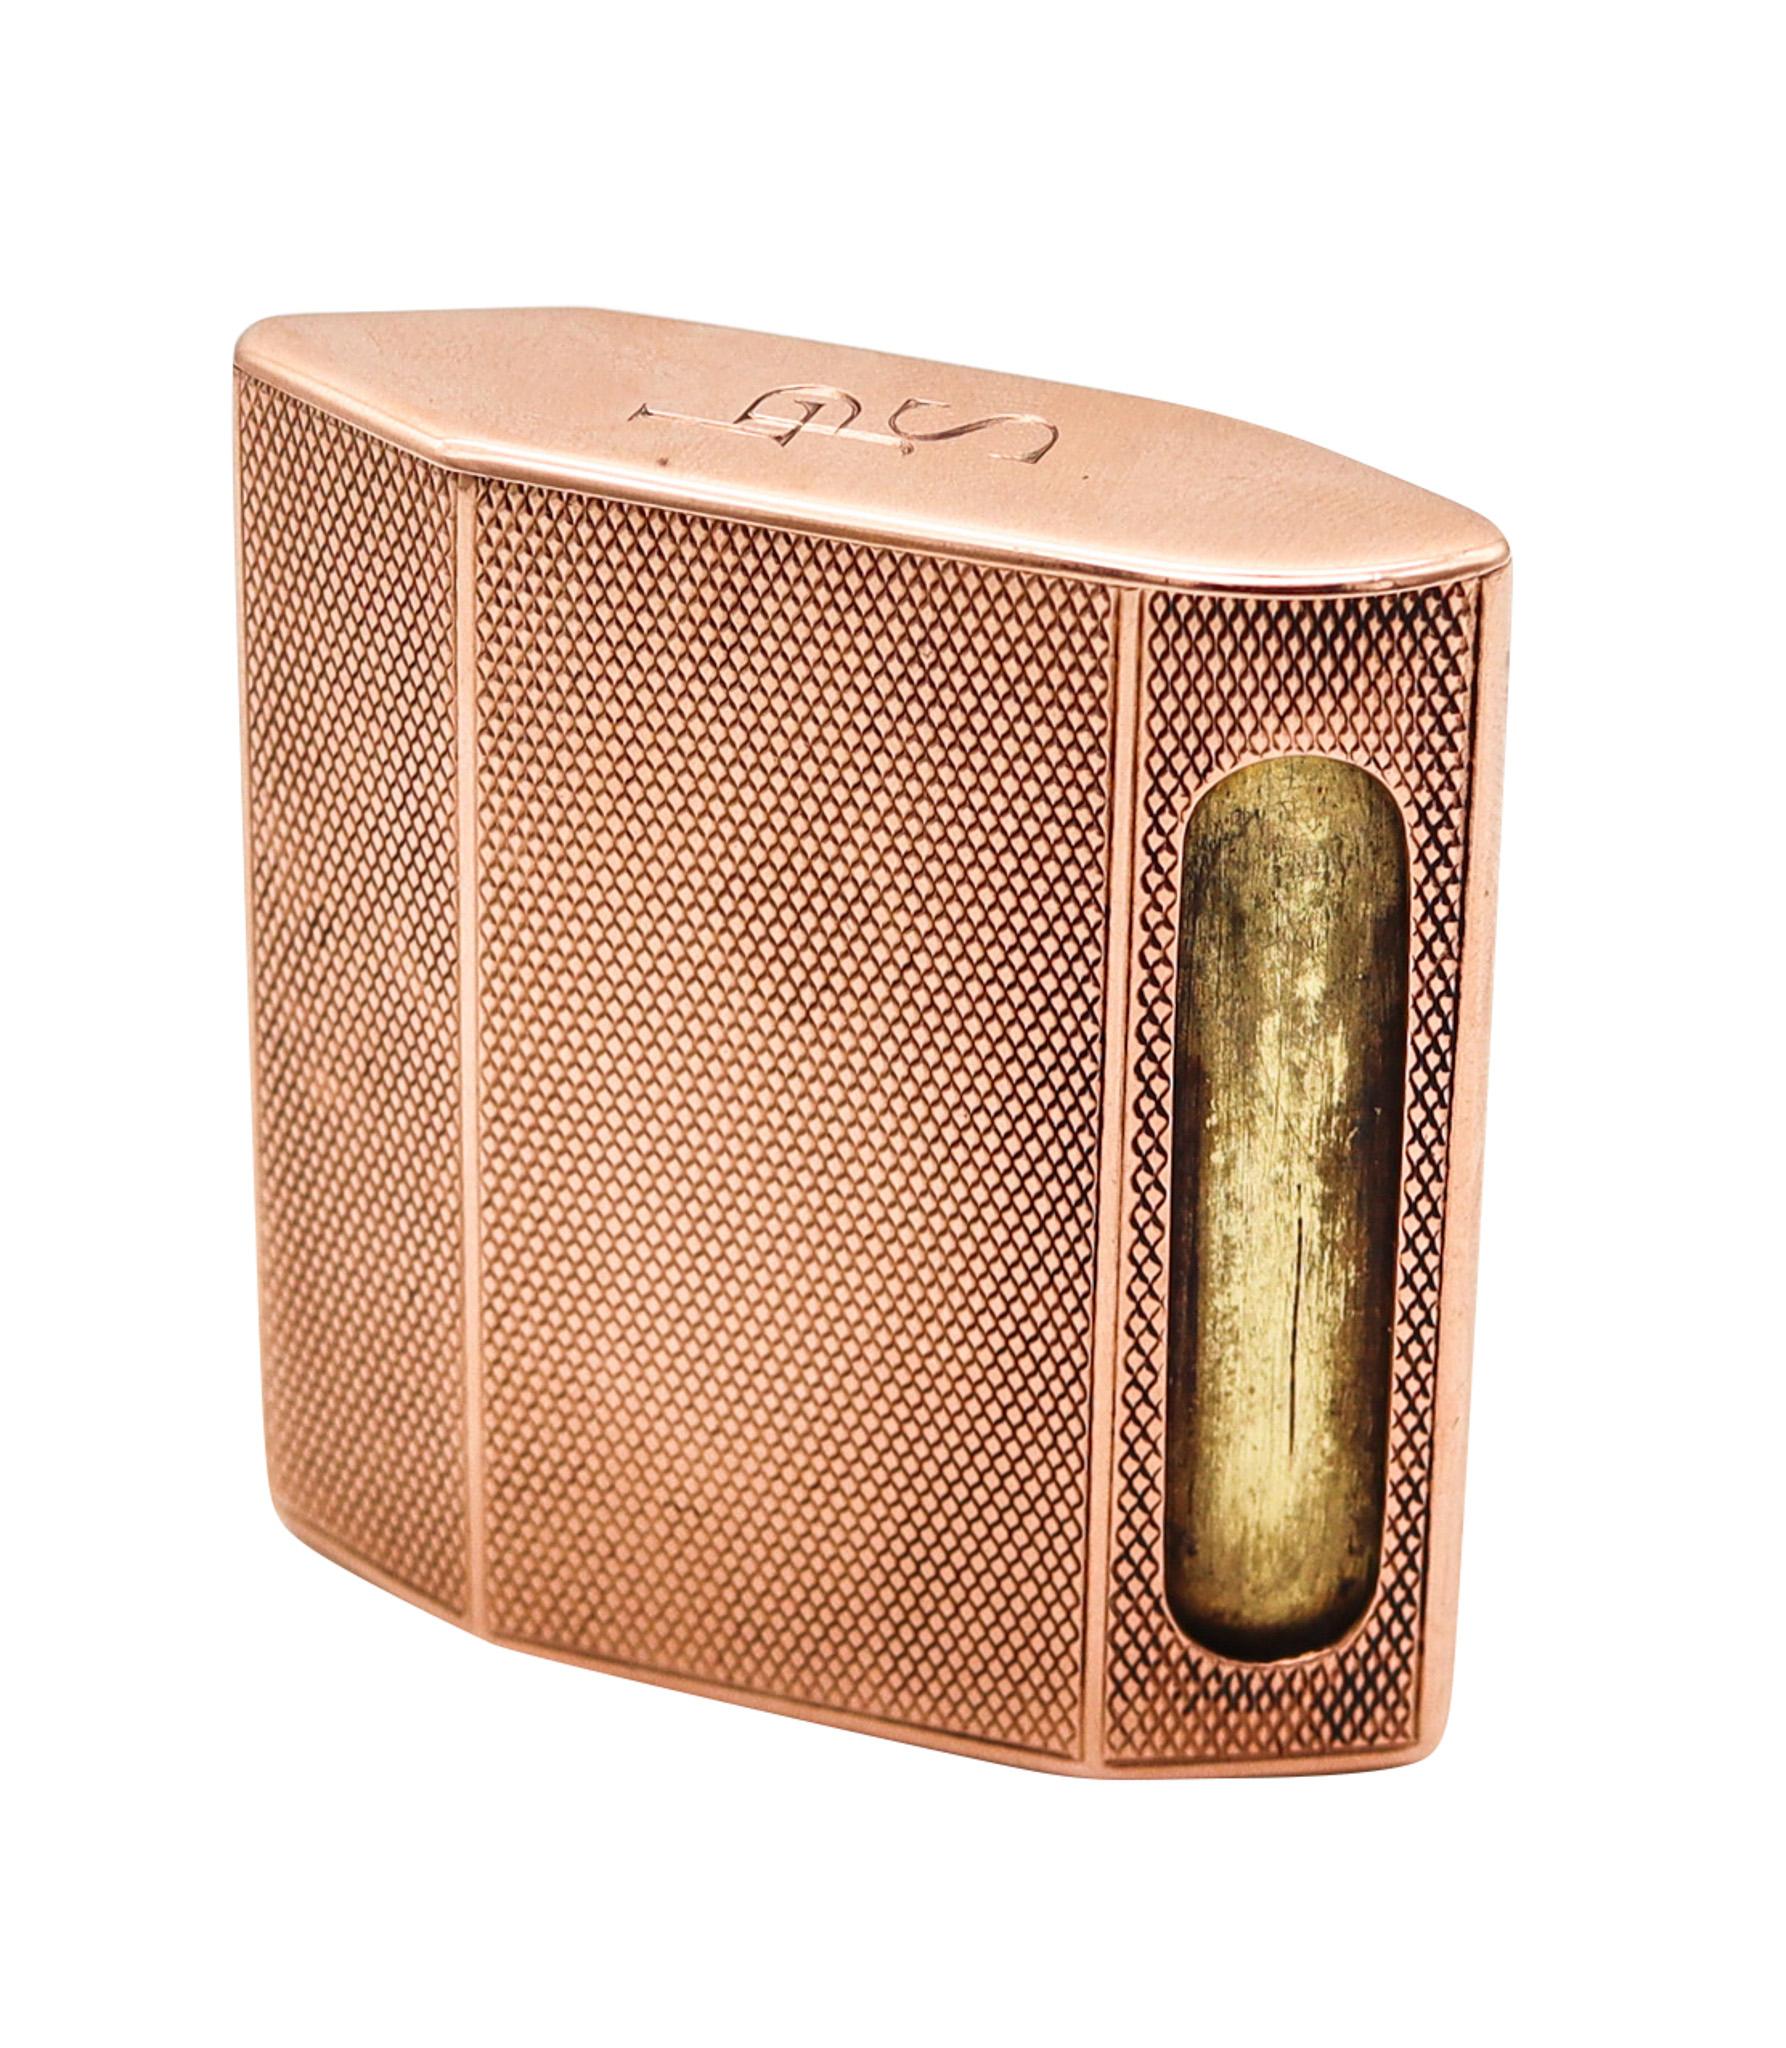 Hexagonal vesta box designed by Asprey & Company.

Very rare and unusual vesta matches box, created in Birmingham England by Asprey & Company Limited, back in the 1923. Crafted during the art deco period in a hexagonal shape in solid yellow gold of